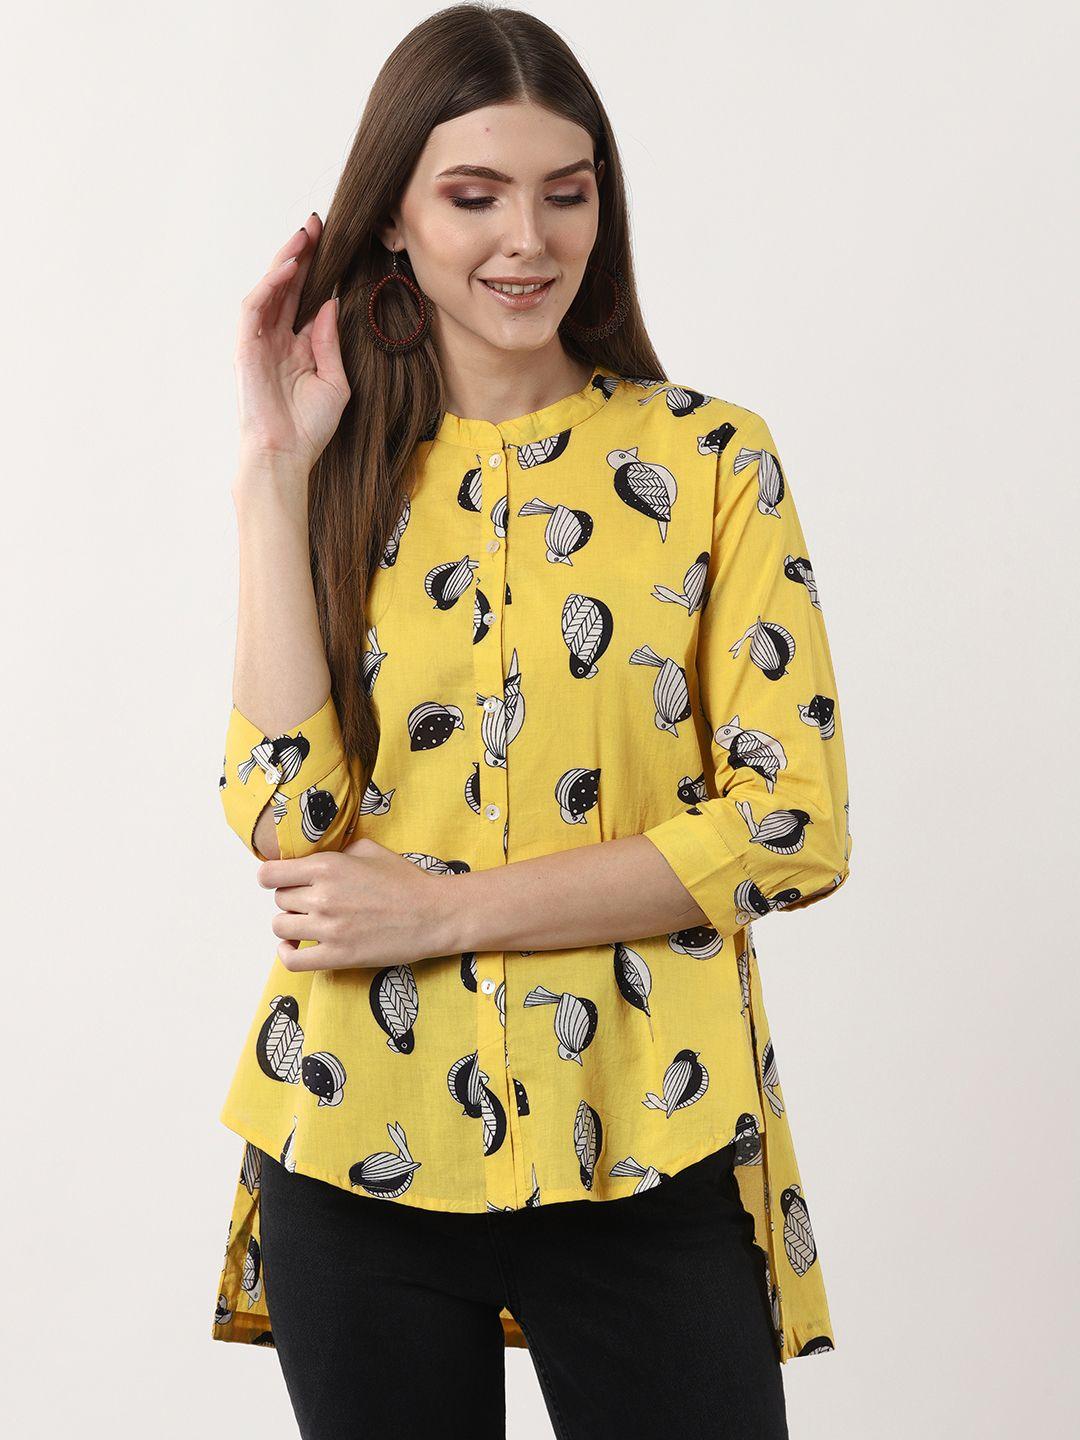 sangria women yellow printed shirt style pure cotton top